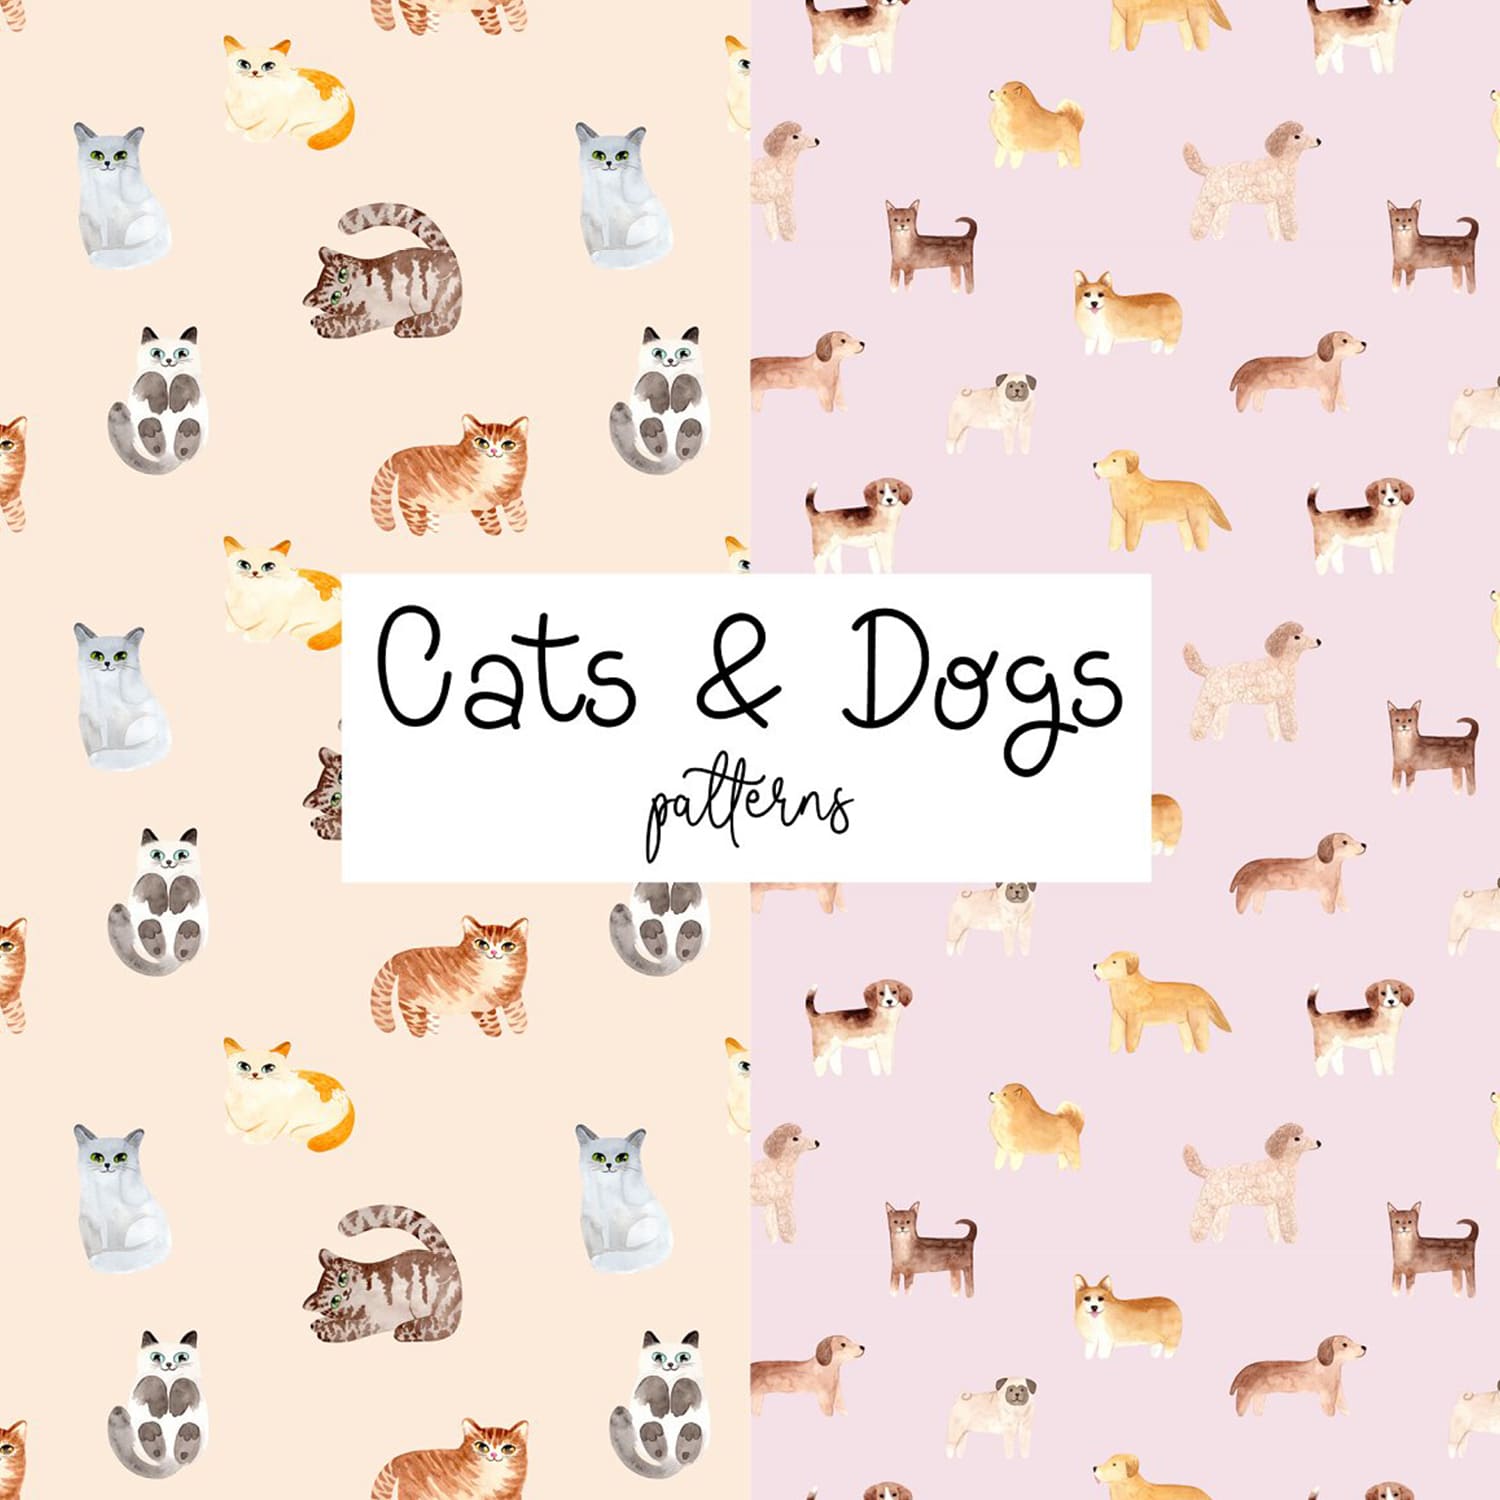 Cats and Dogs Patterns.